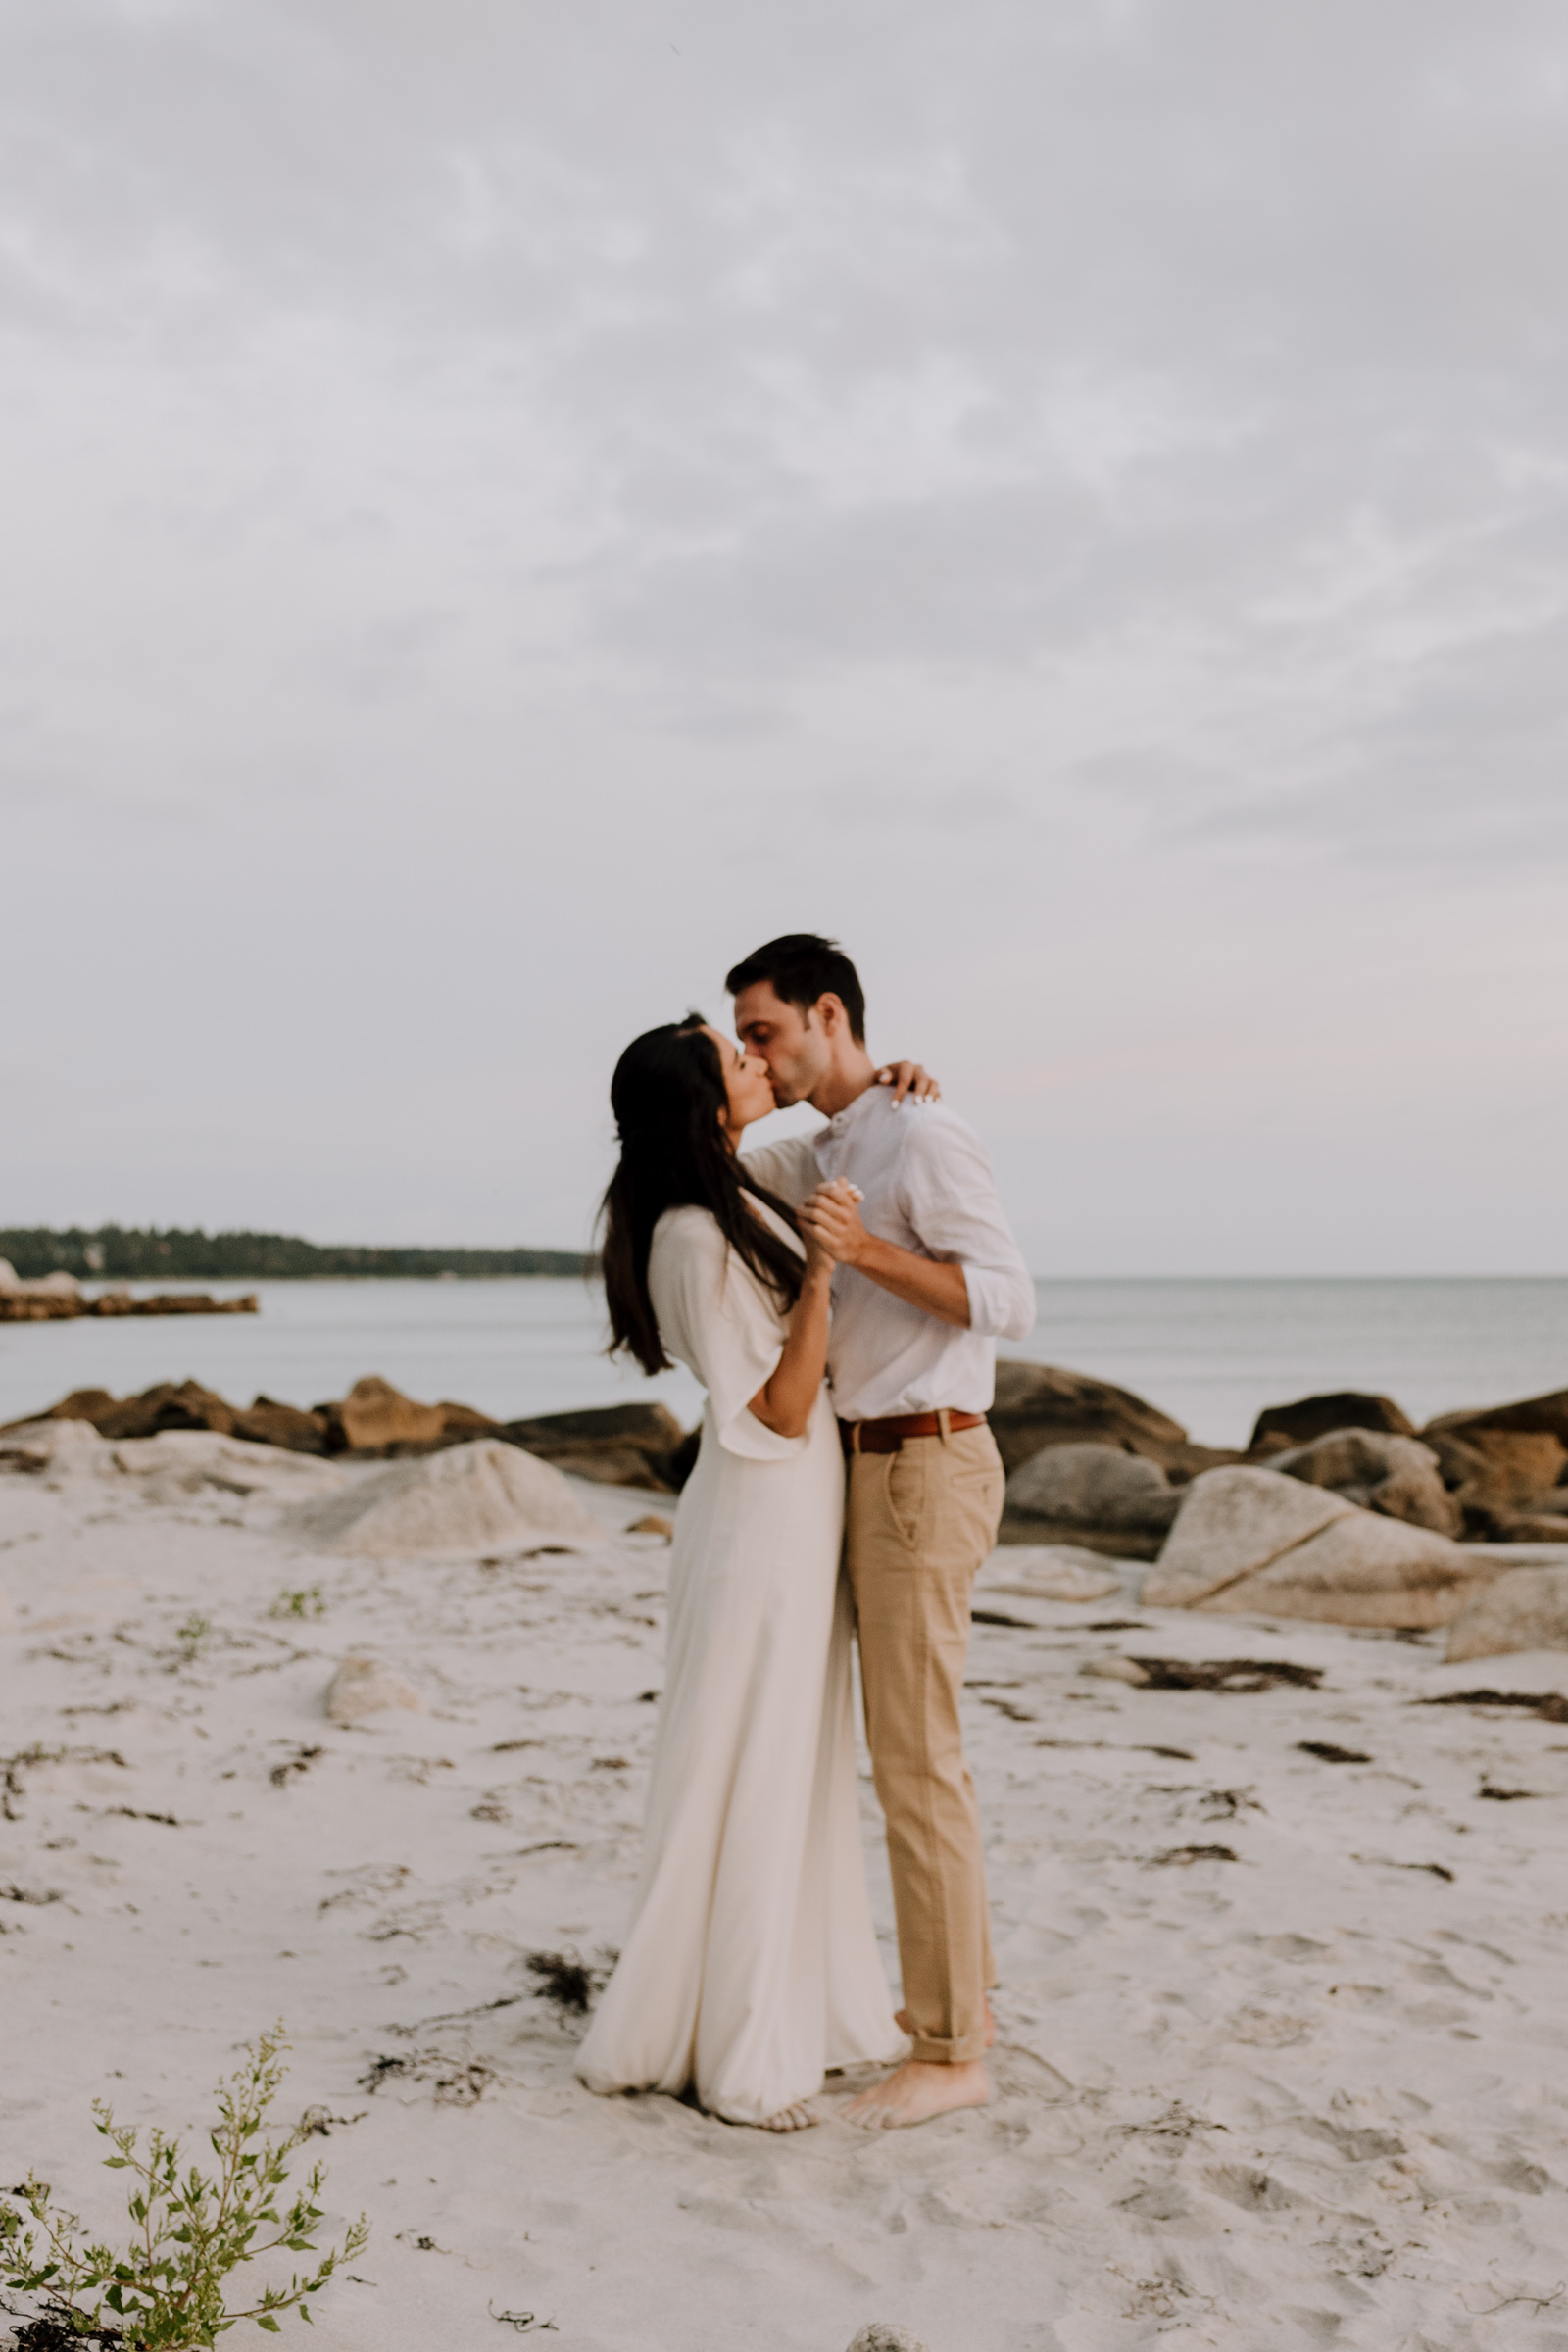 Candid moment of couple kissing during sunset engagement session on the beach in Nova Scotia.